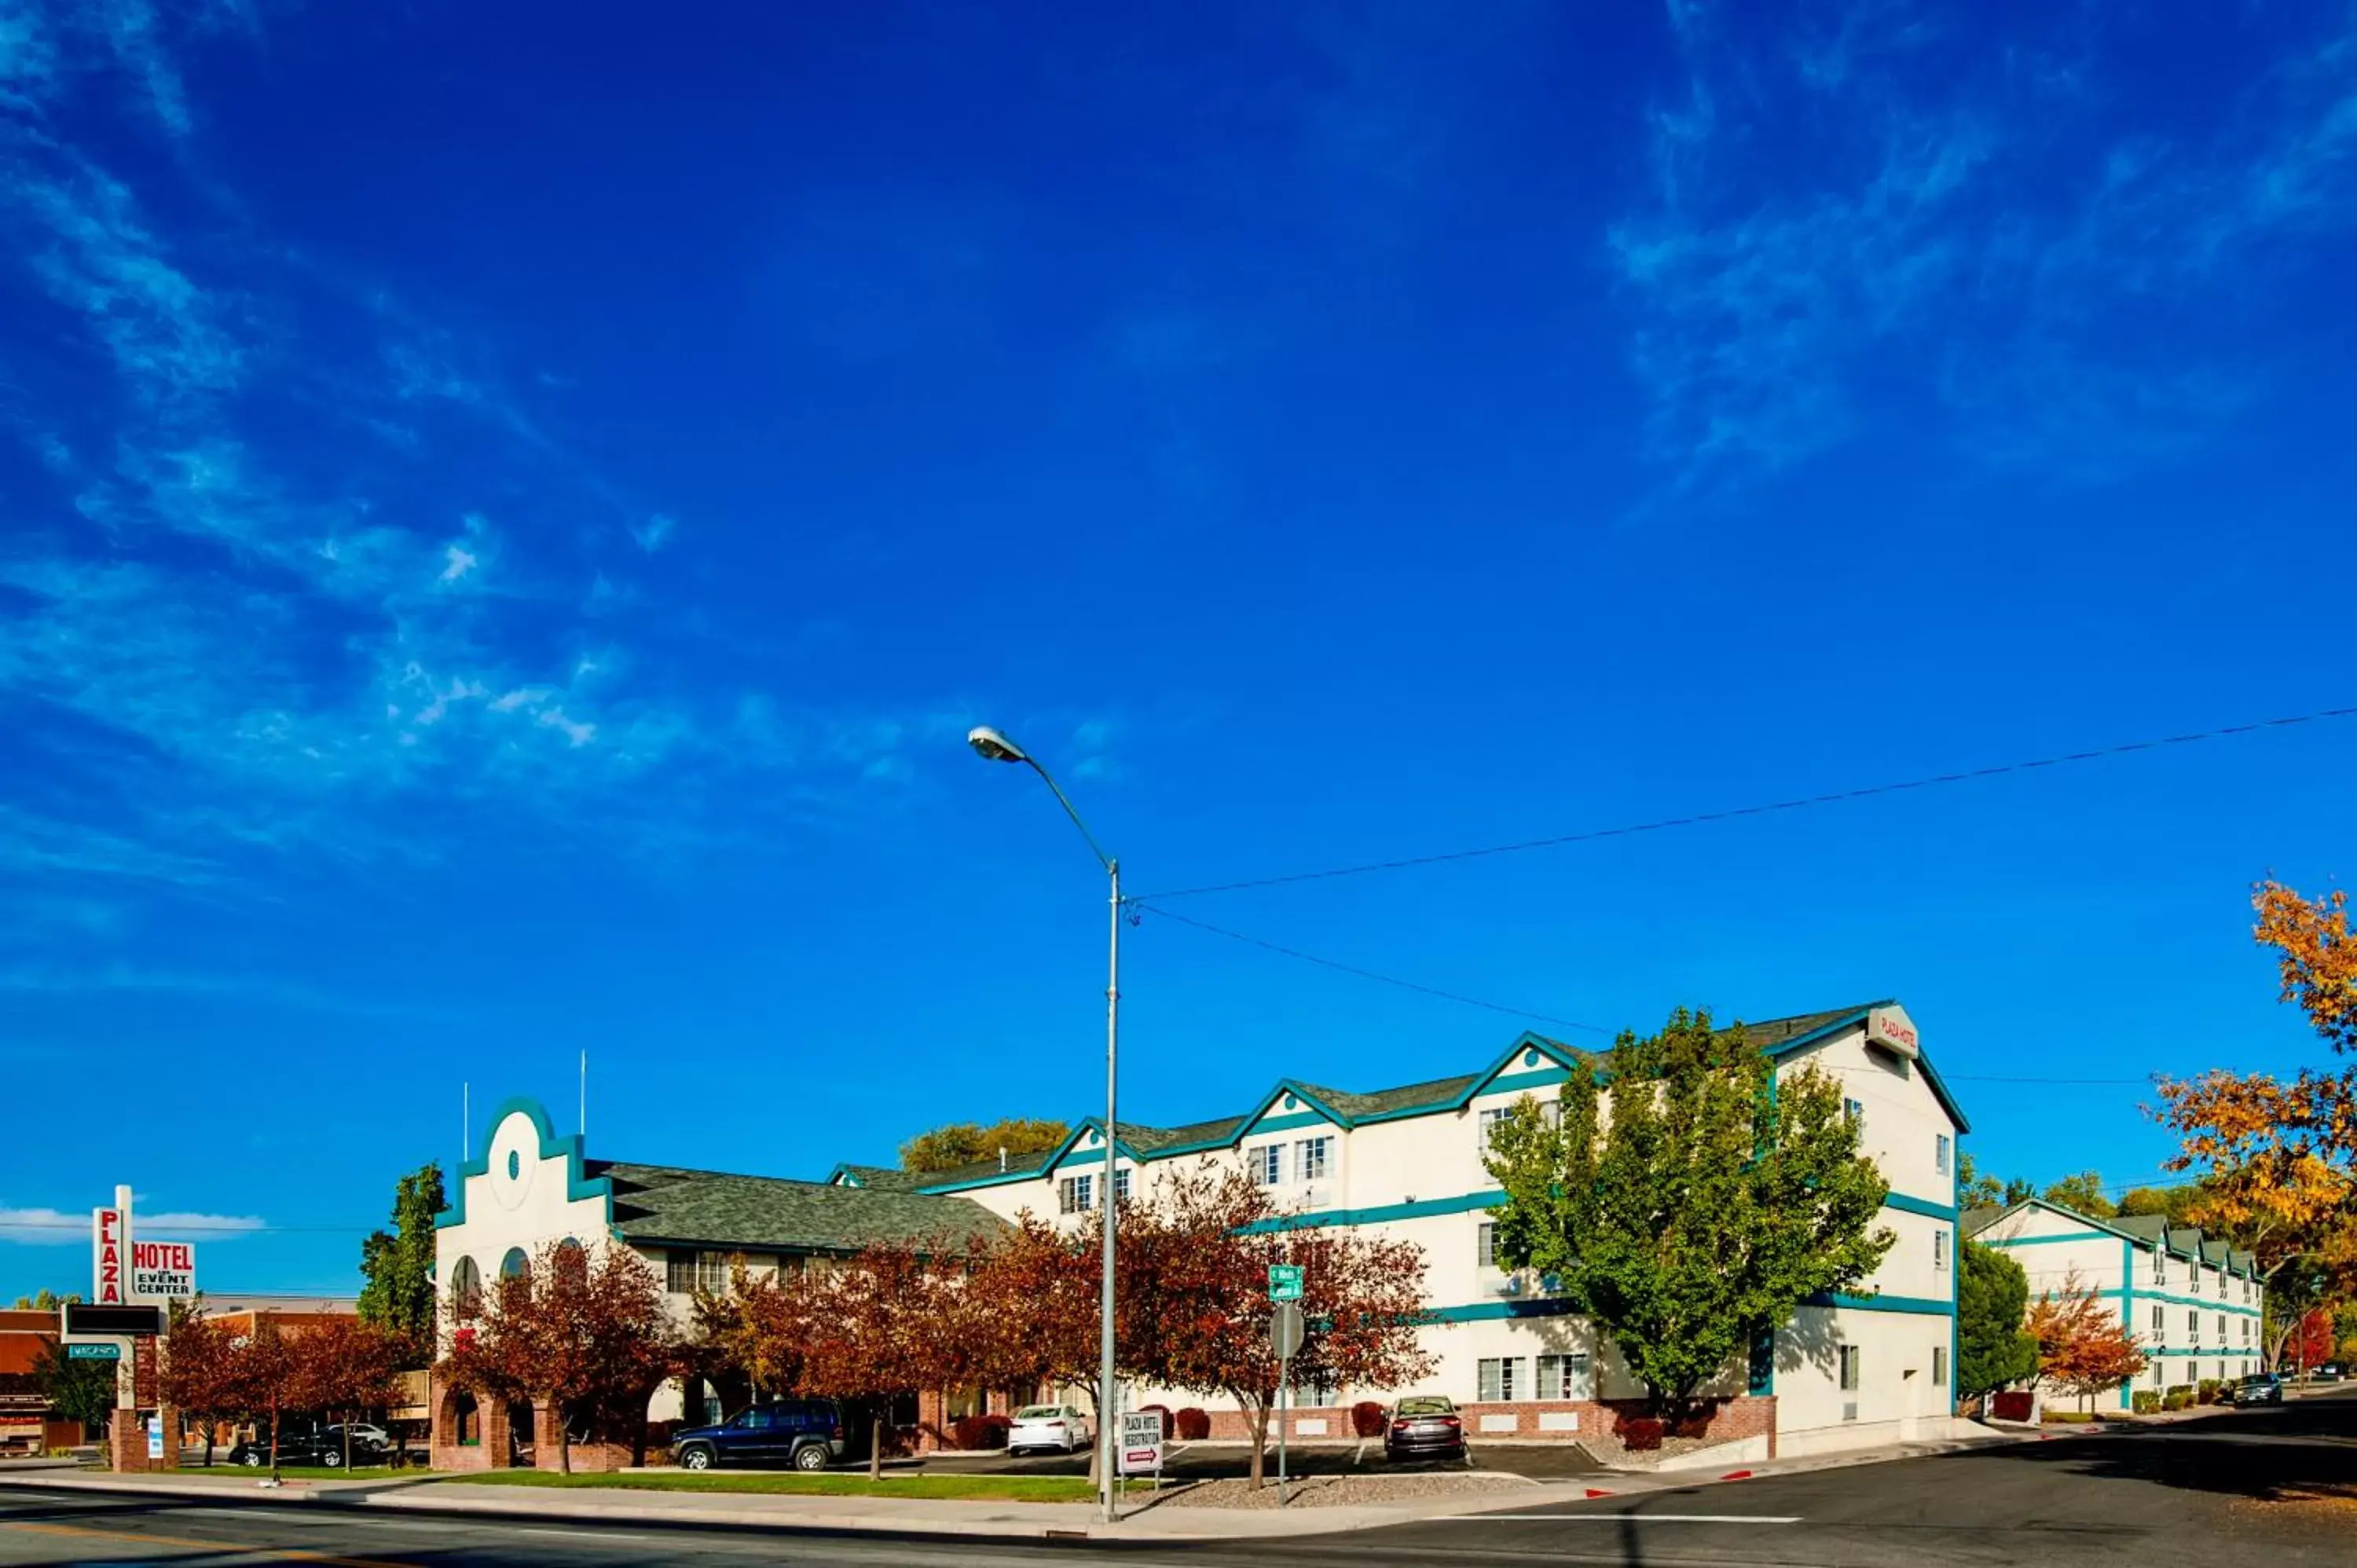 Property building in Carson City Plaza Hotel